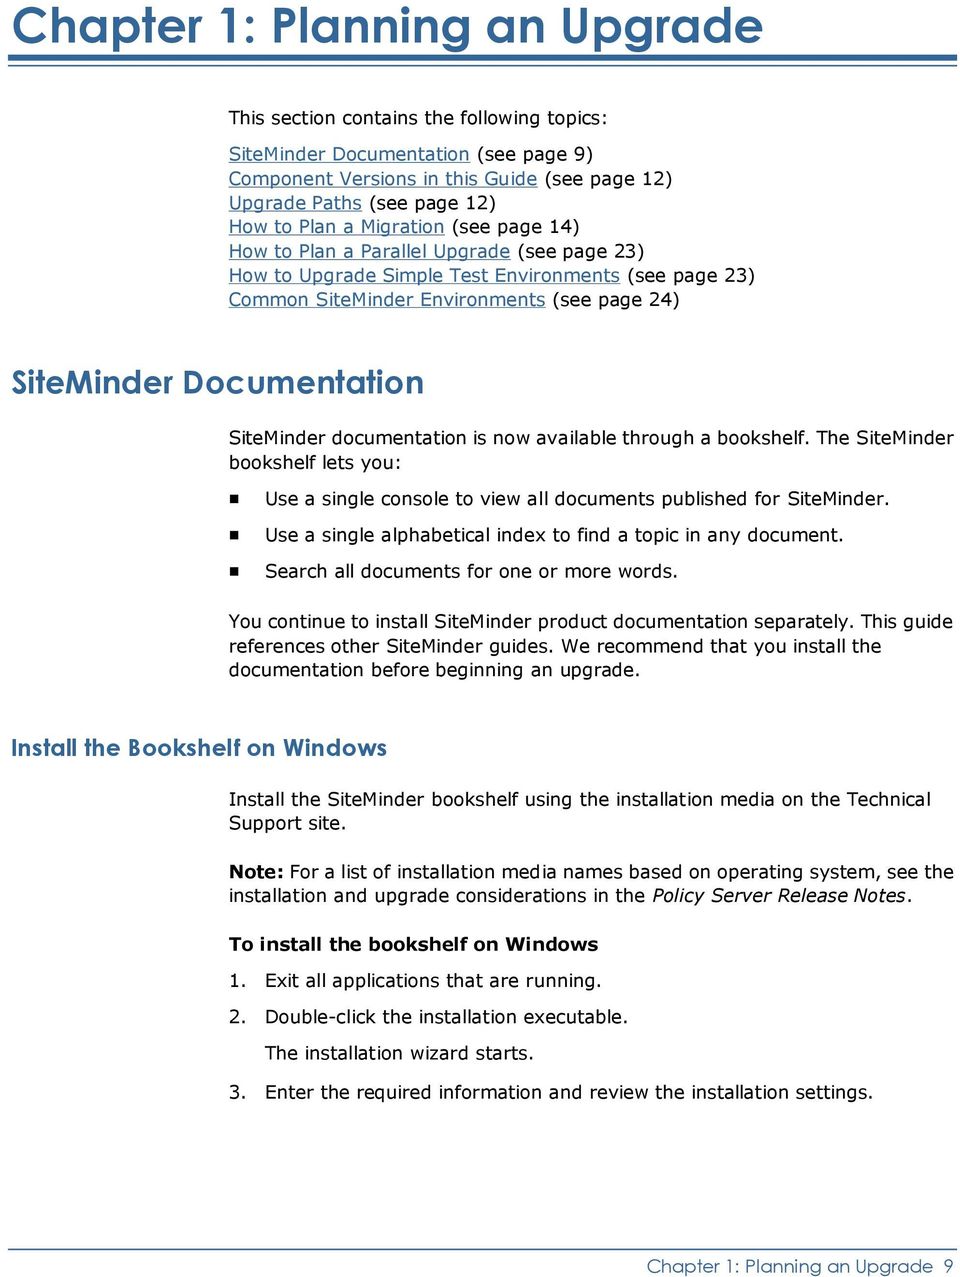 SiteMinder documentation is now available through a bookshelf. The SiteMinder bookshelf lets you: Use a single console to view all documents published for SiteMinder.